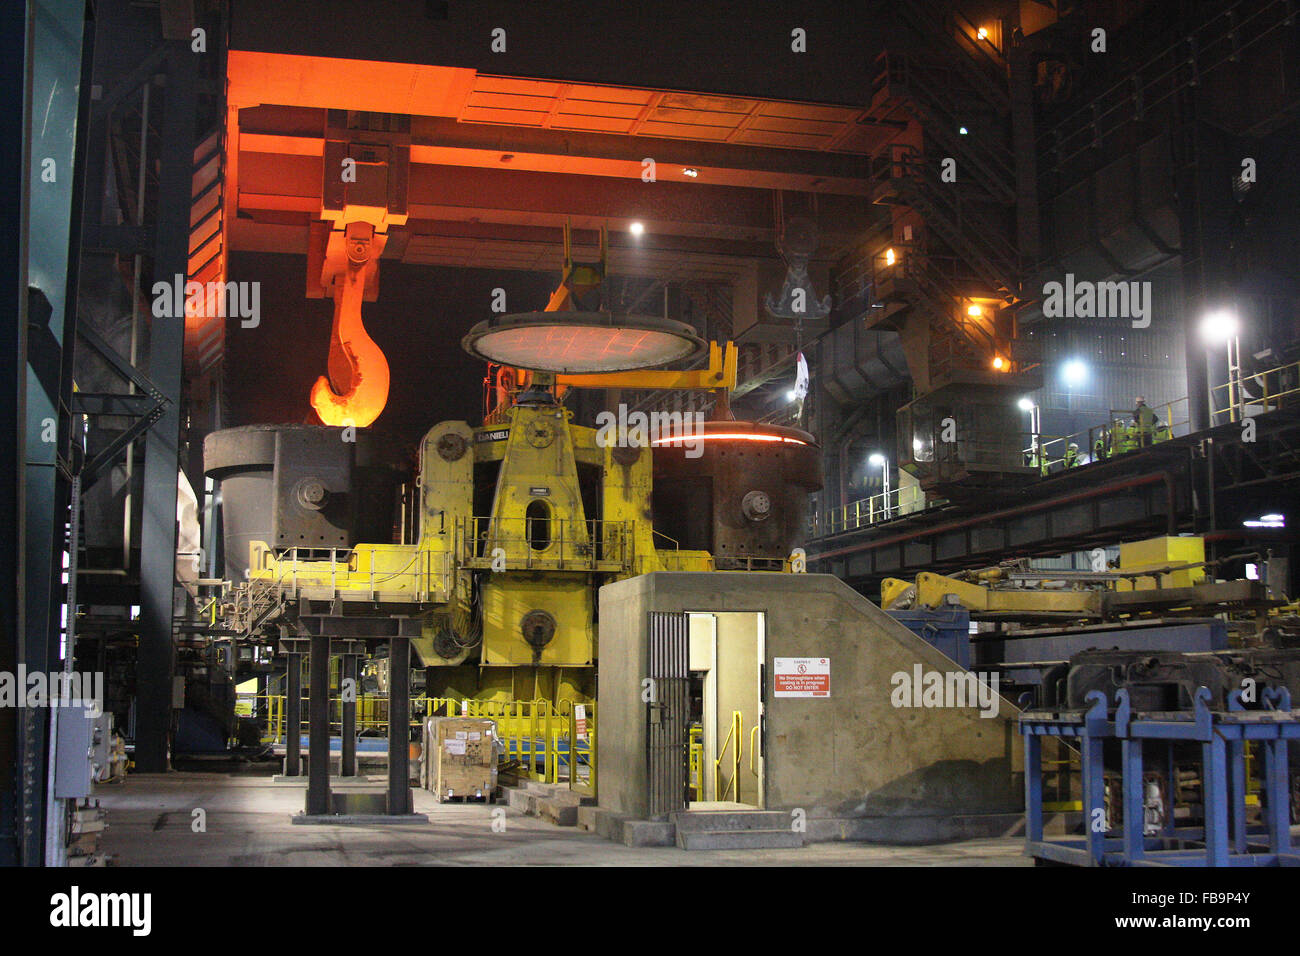 Steelworks continuous steel casting machine. Stock Photo